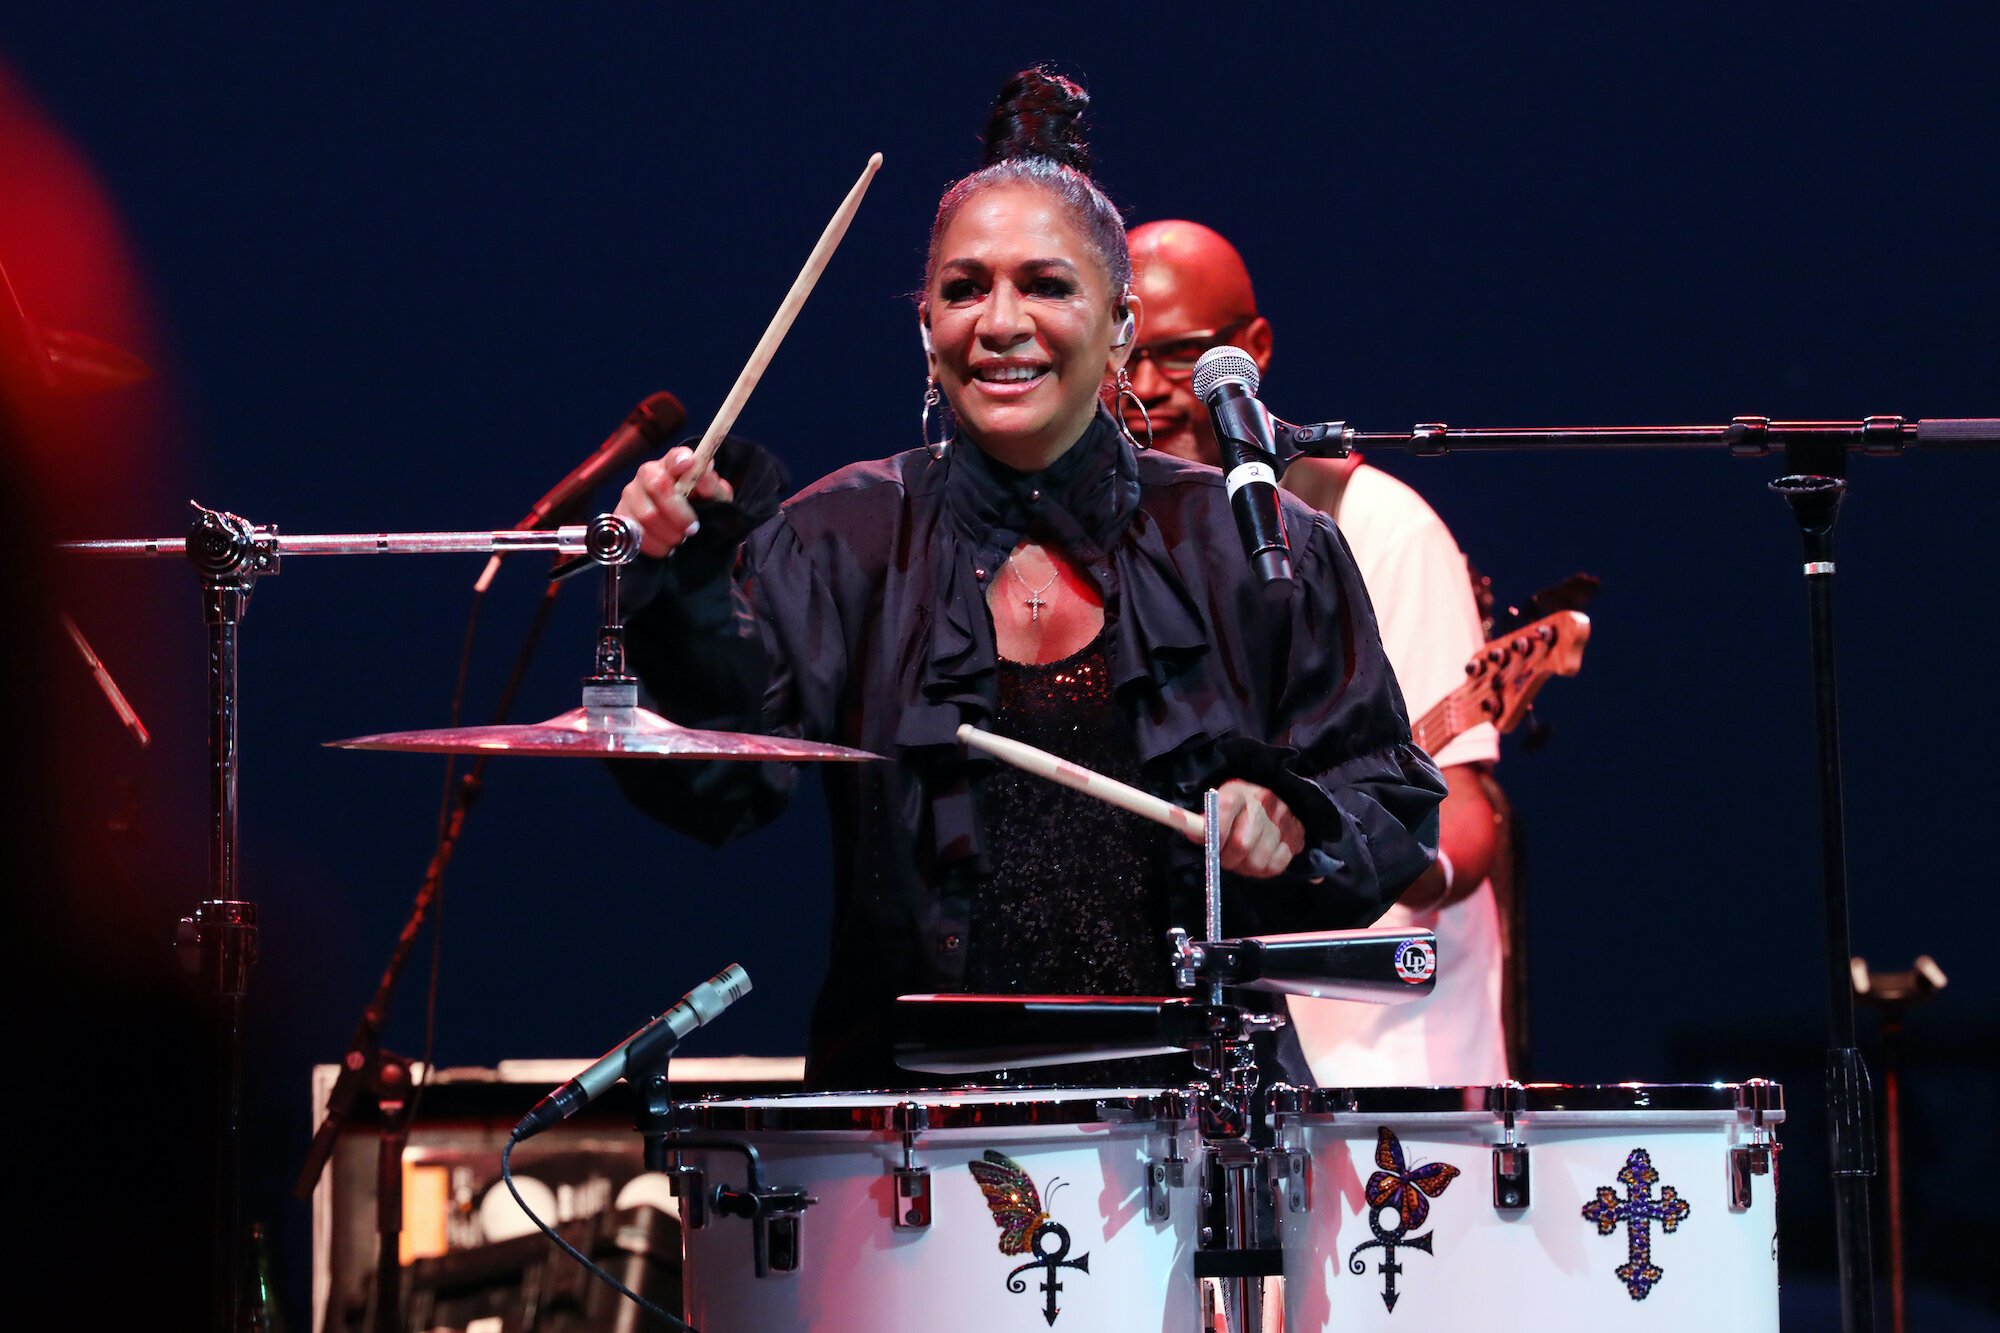 The incomparable Sheila E wore a shirt belonging to Prince. The Purple Rain tour in 1984 kicked off in Detroit on November 4, 1984. The percussionist called her return to The Aretha post-COVID “a full-circle moment.” Photo by Monica Morgan.